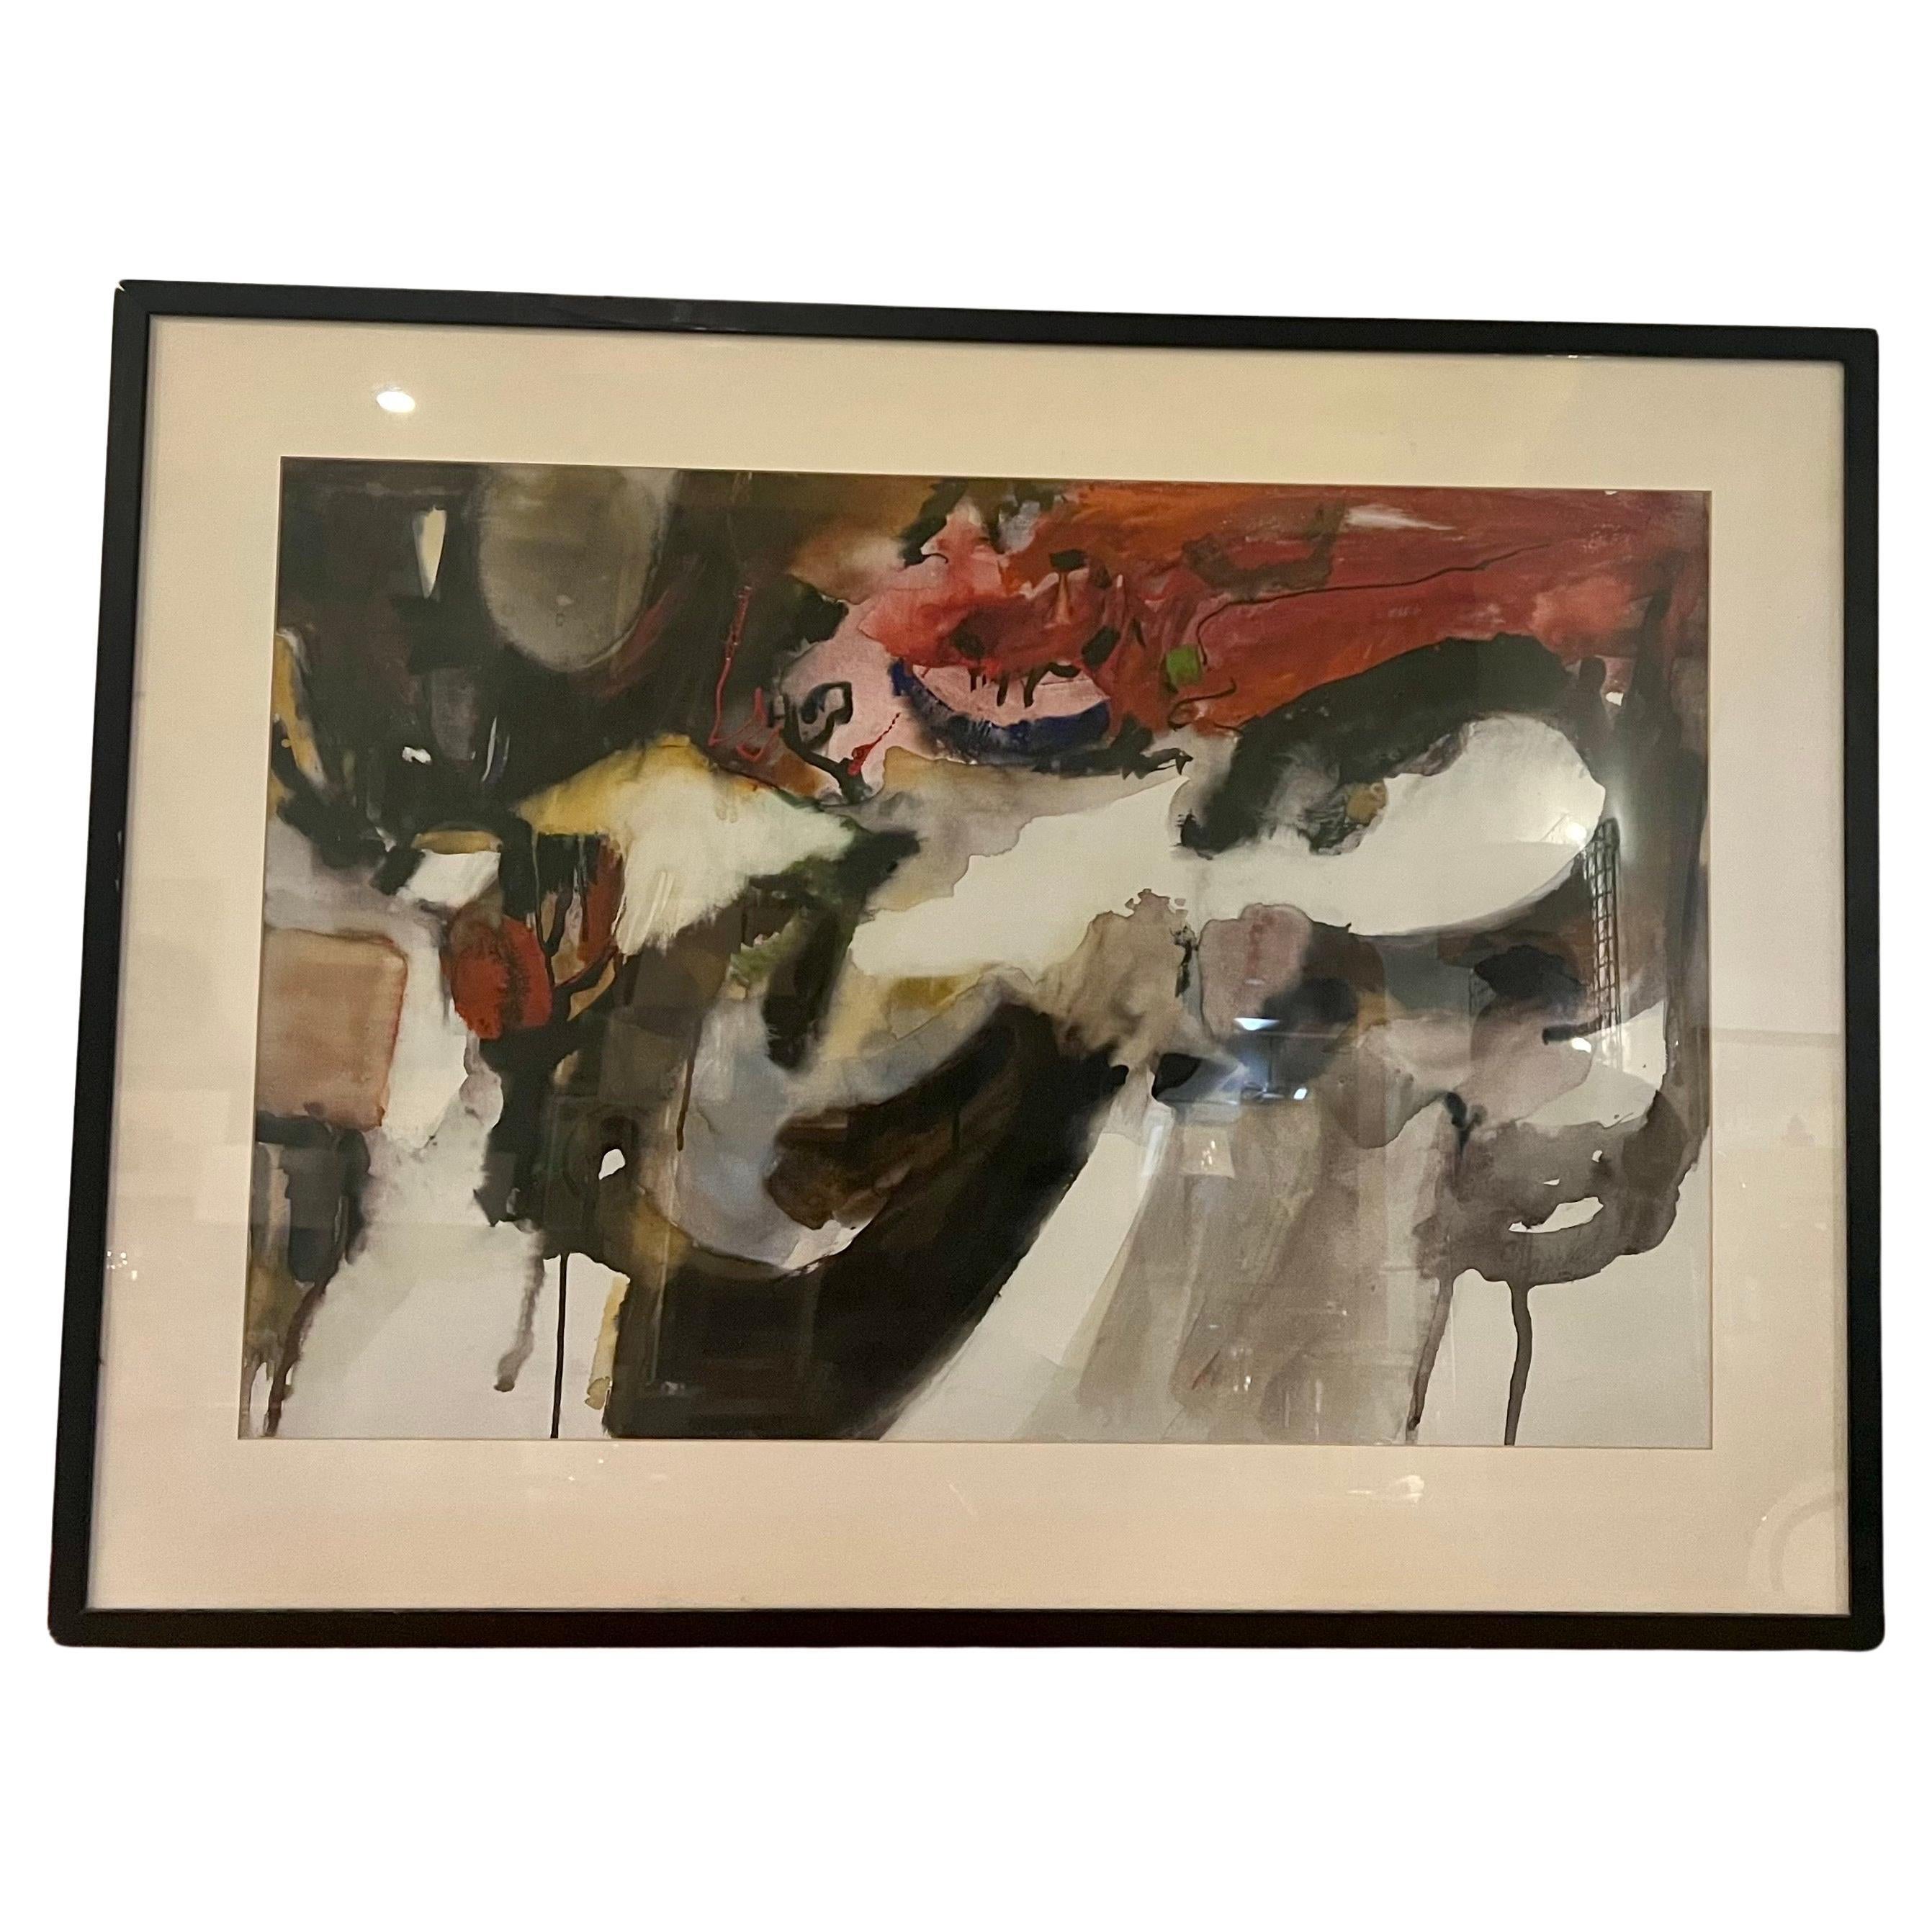 Large Framed original watercolor on canvas abstract by California artist Caroline Harris, comes with an original display tag from the Fresno District Fair Art Show from 1973, titled Landscape with red trees, 